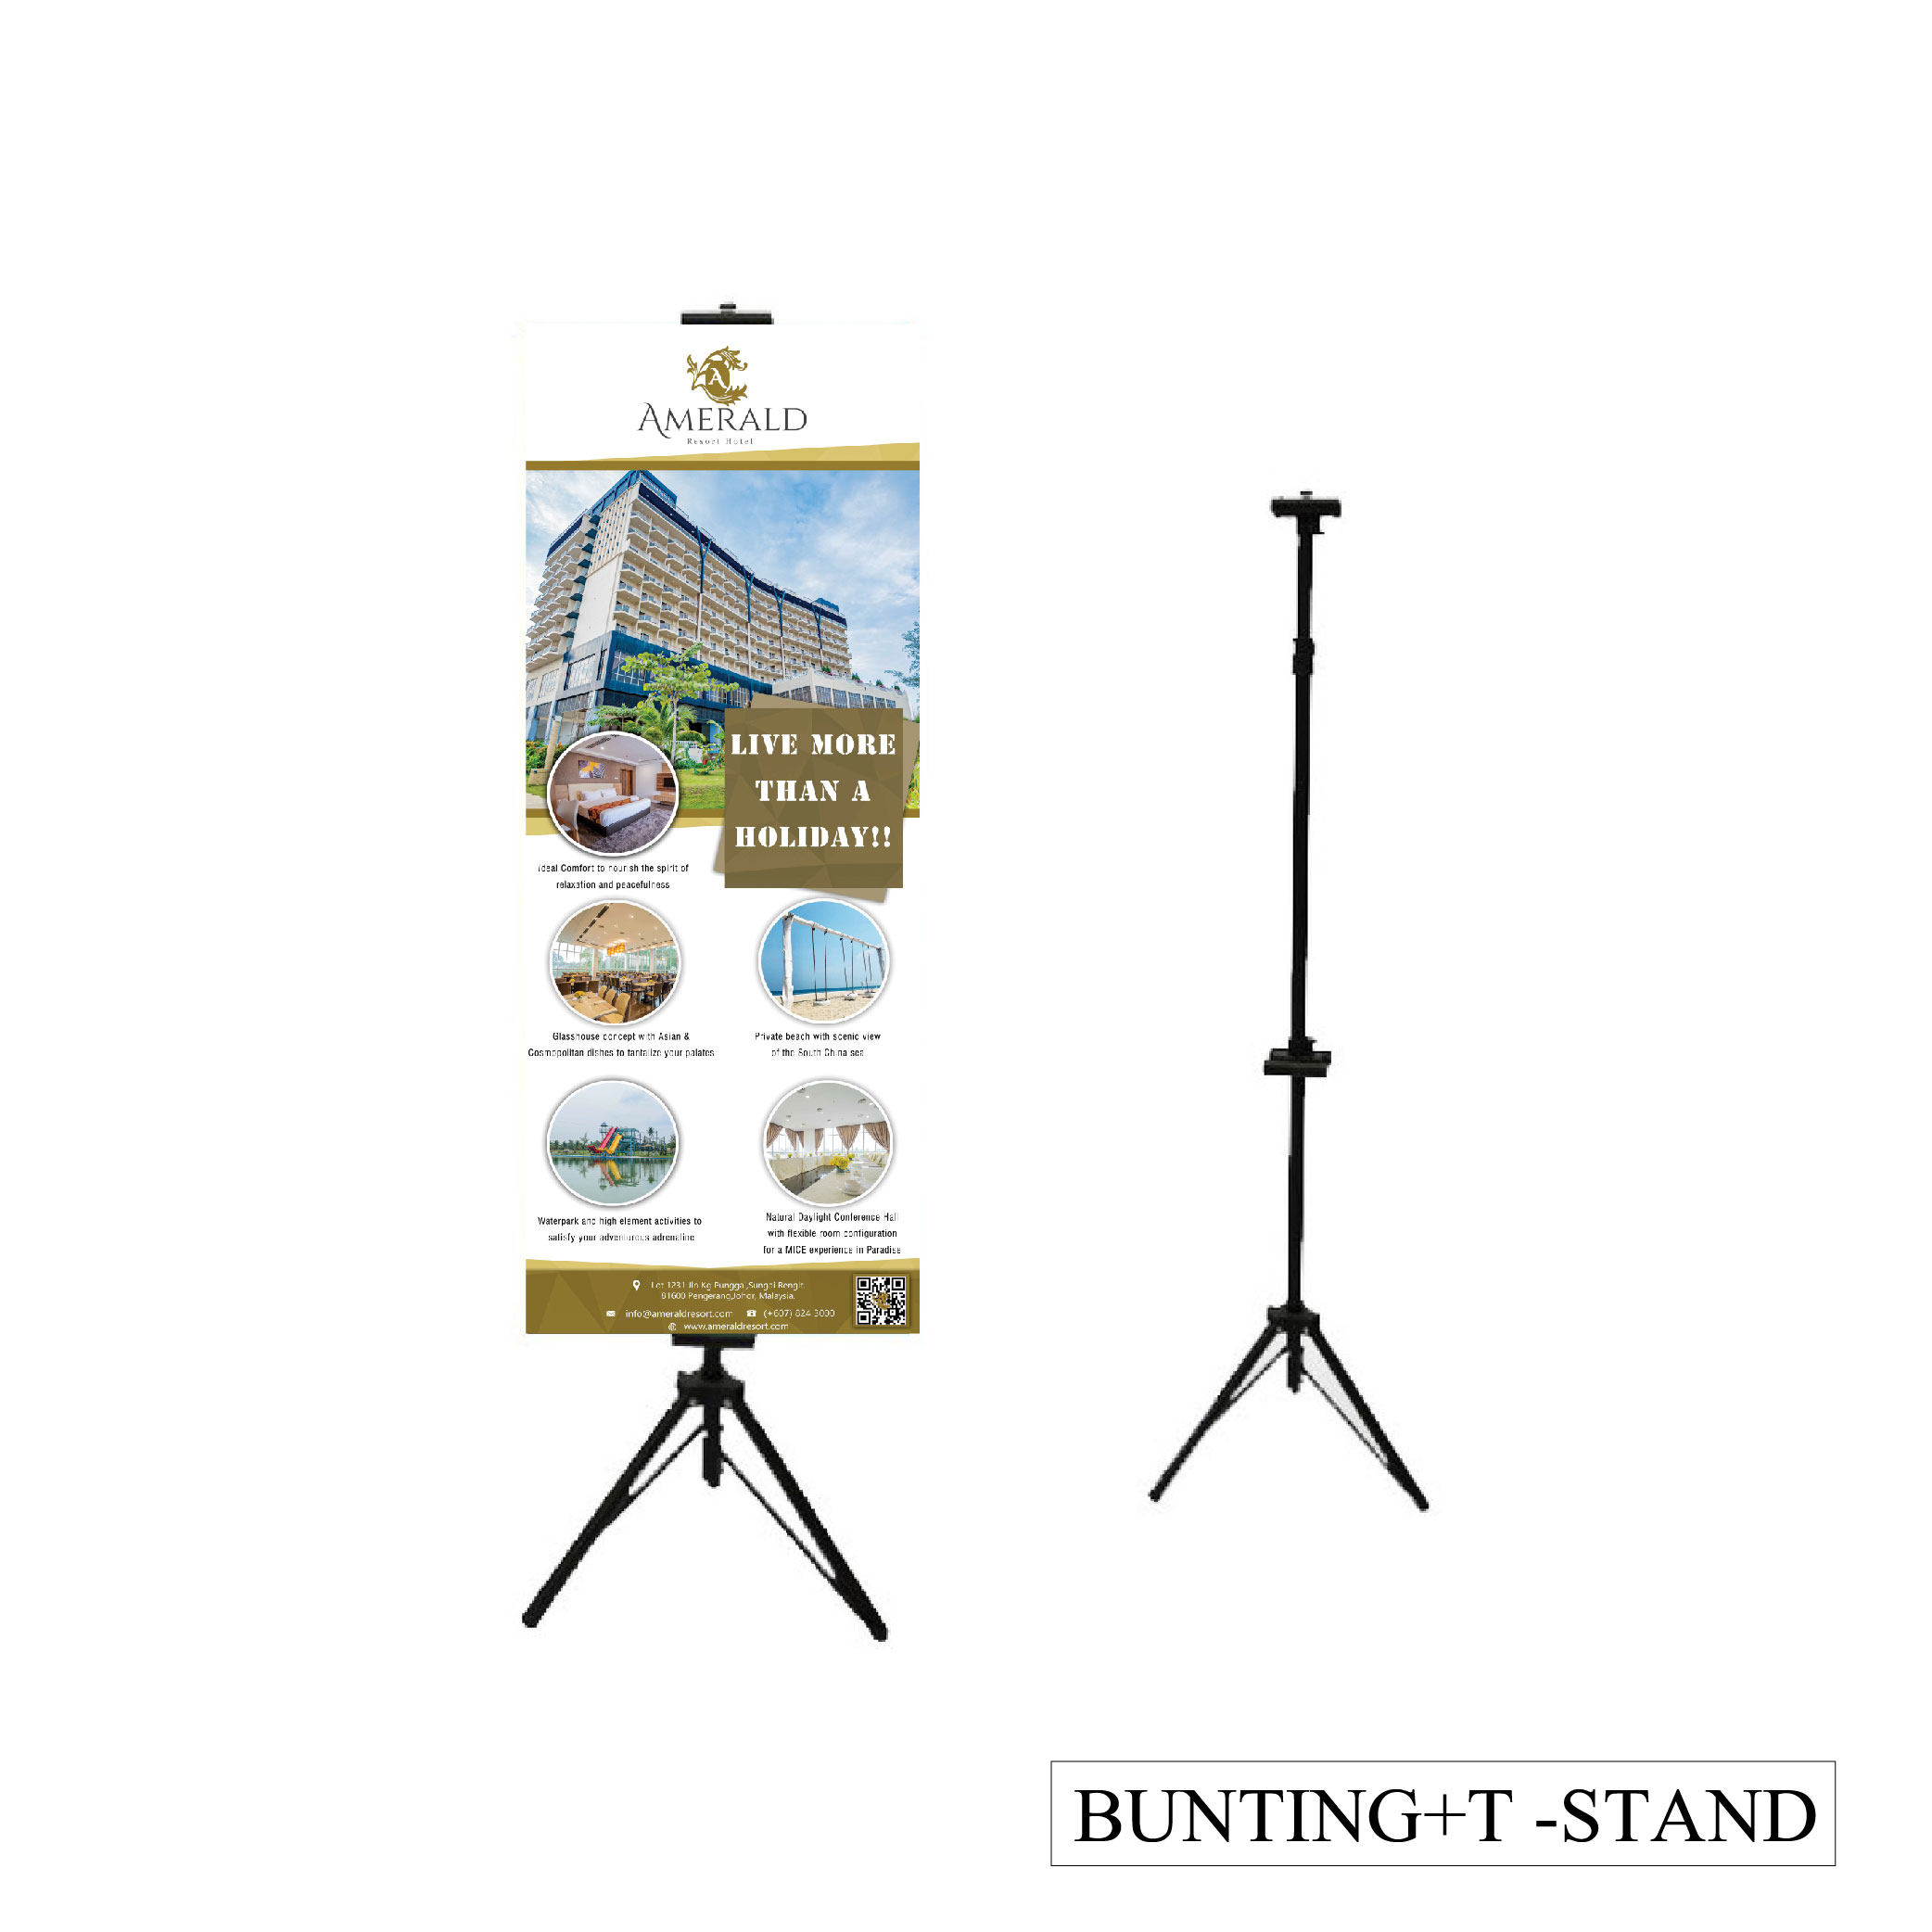 Bunting + t-stand